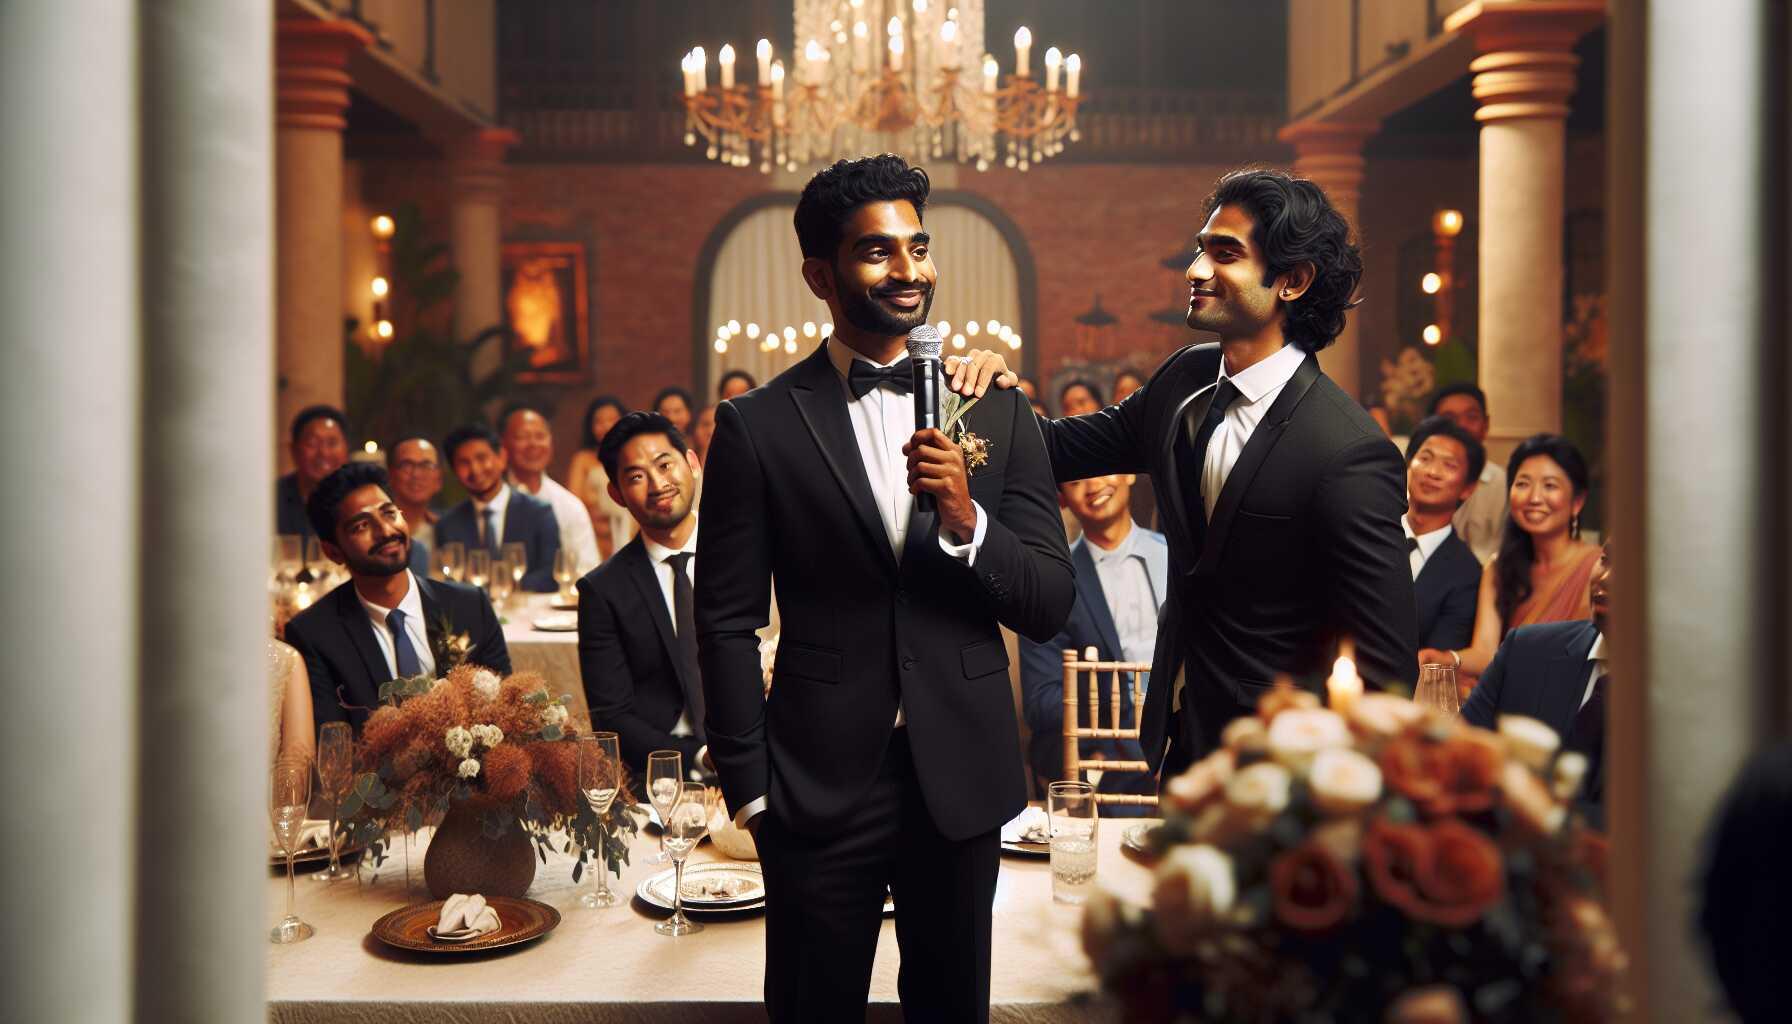 10 Best Man Brother Speech Examples to Make Your Speech Memorable